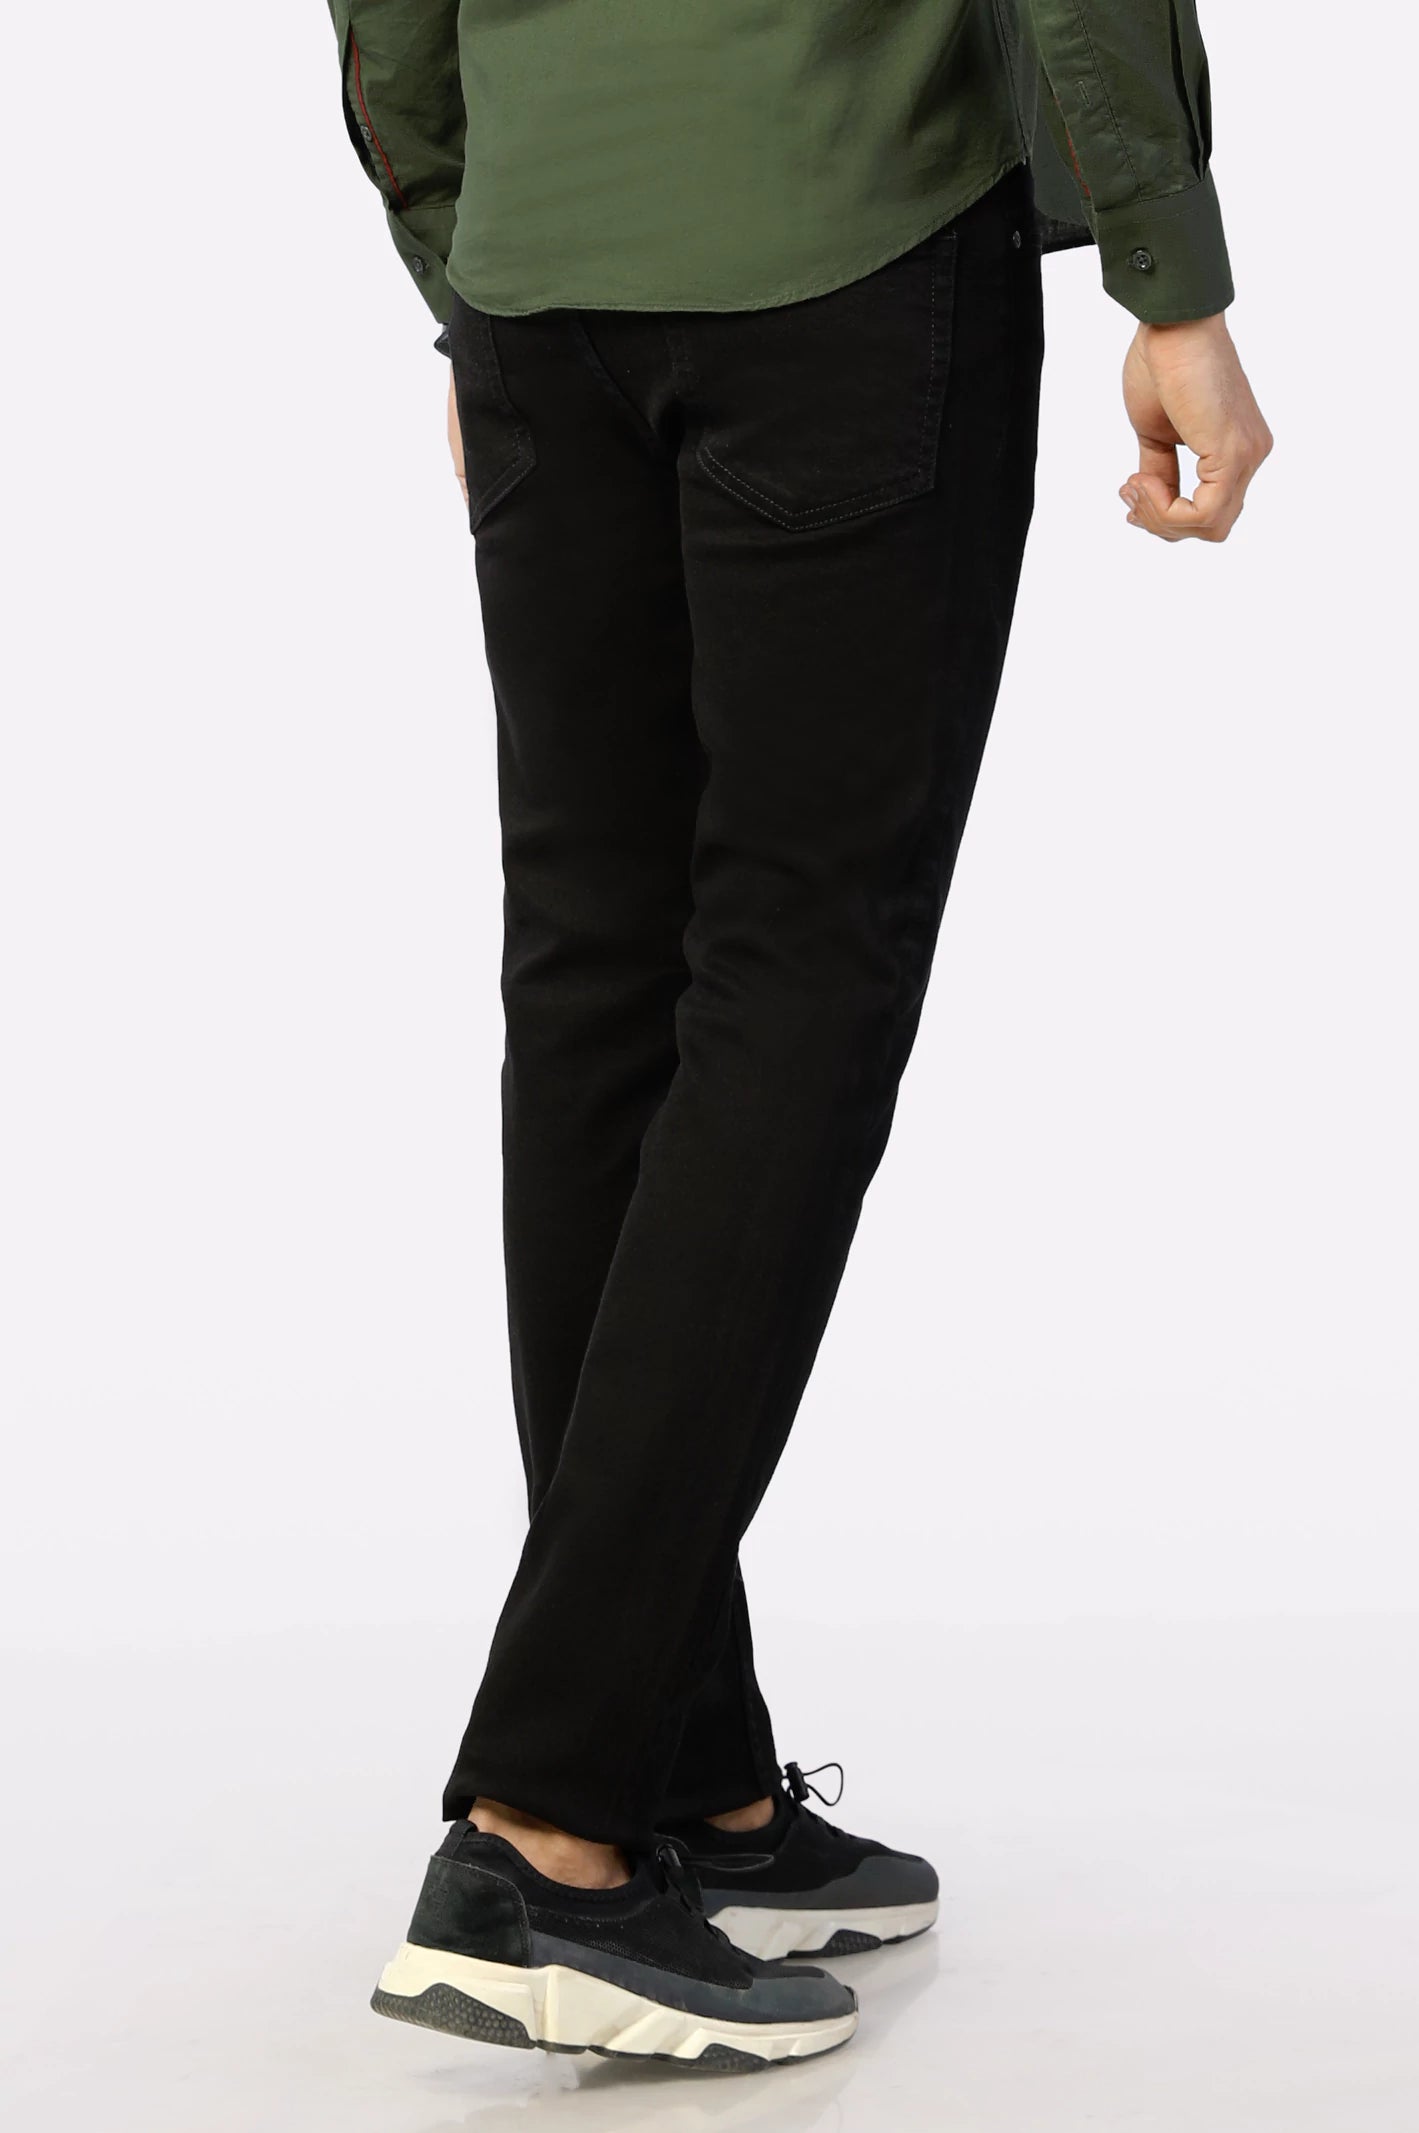 Jet Black Smart Fit Jeans From Diners